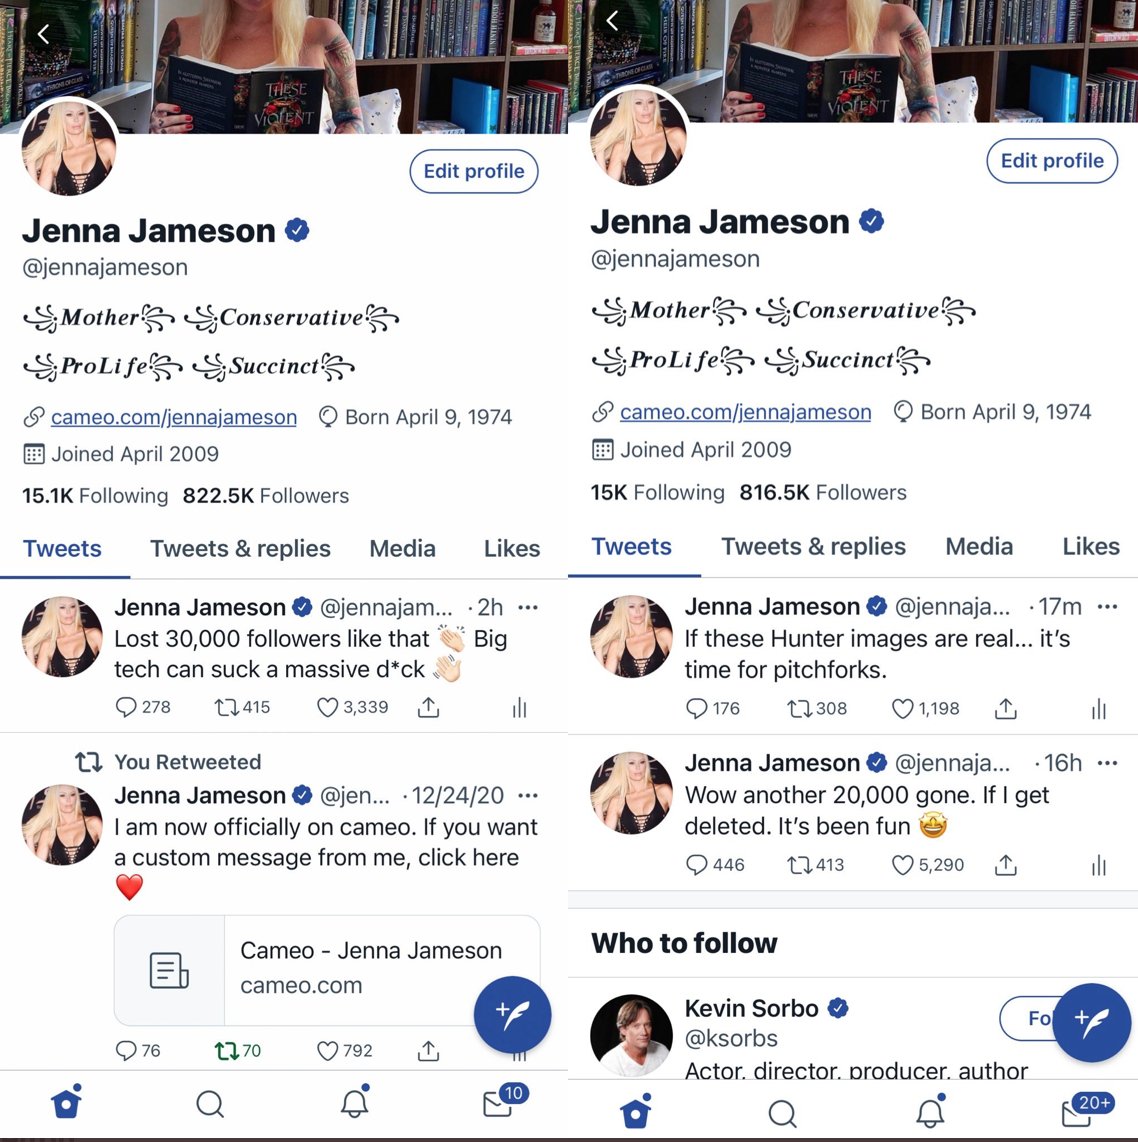 So sad that conservatives are pulling out of Jenna Jameson. Leading her to have less penetration. Apparently her fans are in a state of detumescent and she has yet to figure out that they were never real.